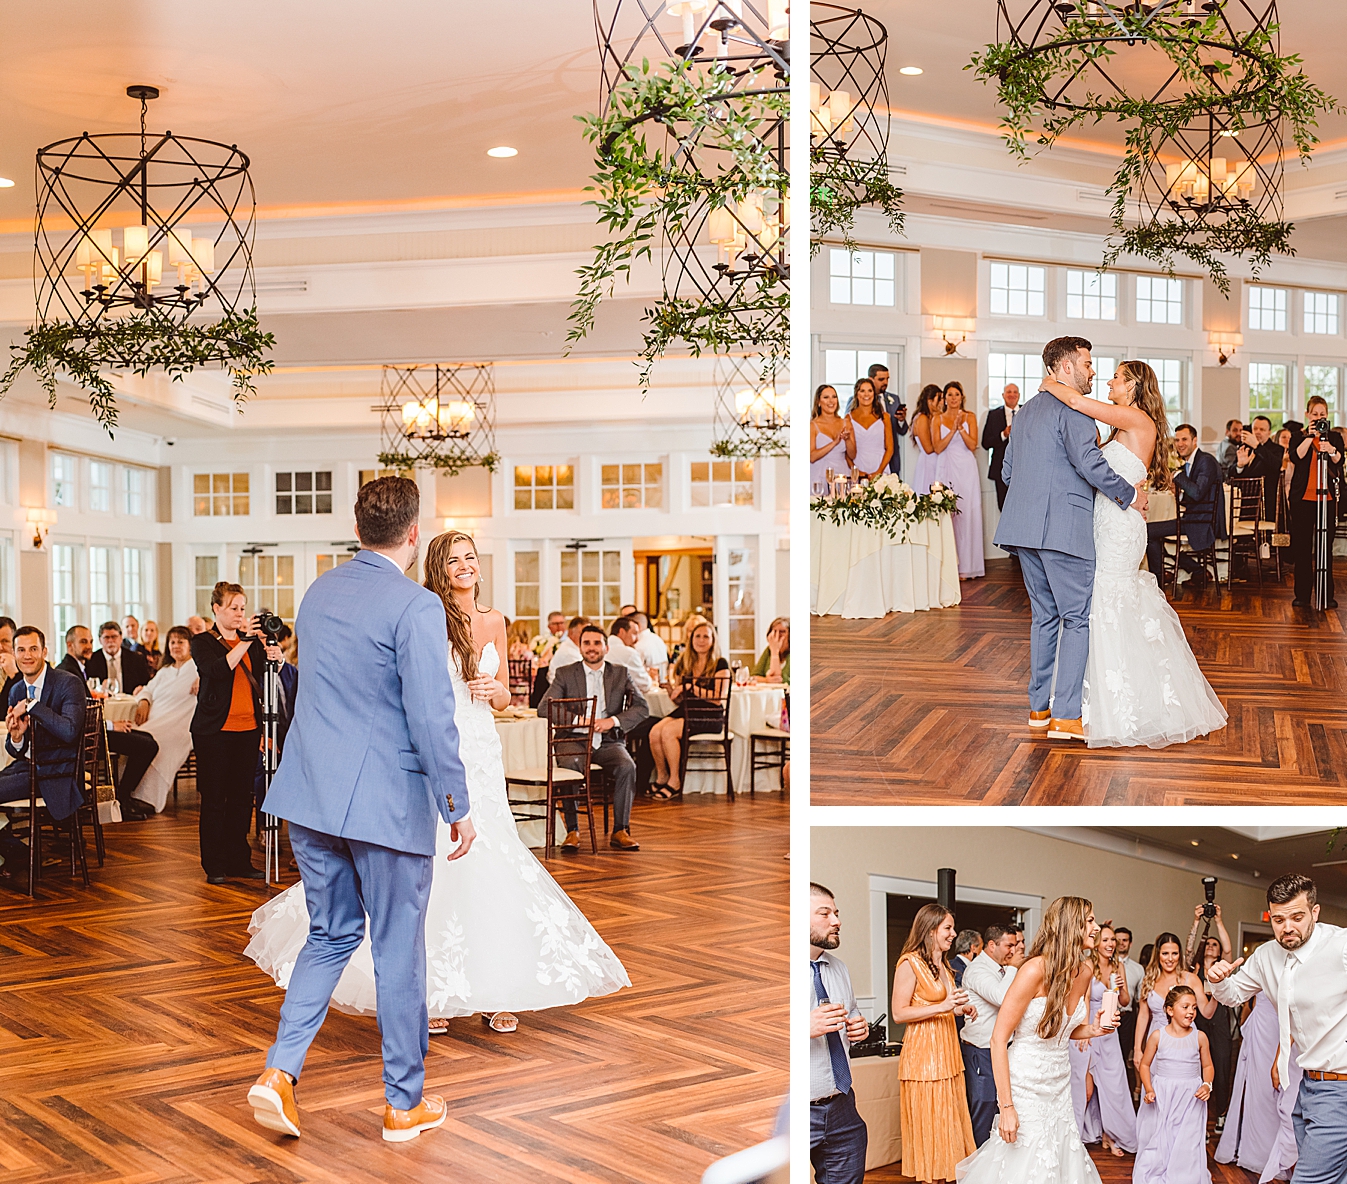 Bride and groom twirling during first dance | bride and groom’s first dance at Chesapeake Bay Beach Club | Bride and groom dancing during reception | Brooke Michelle Photo